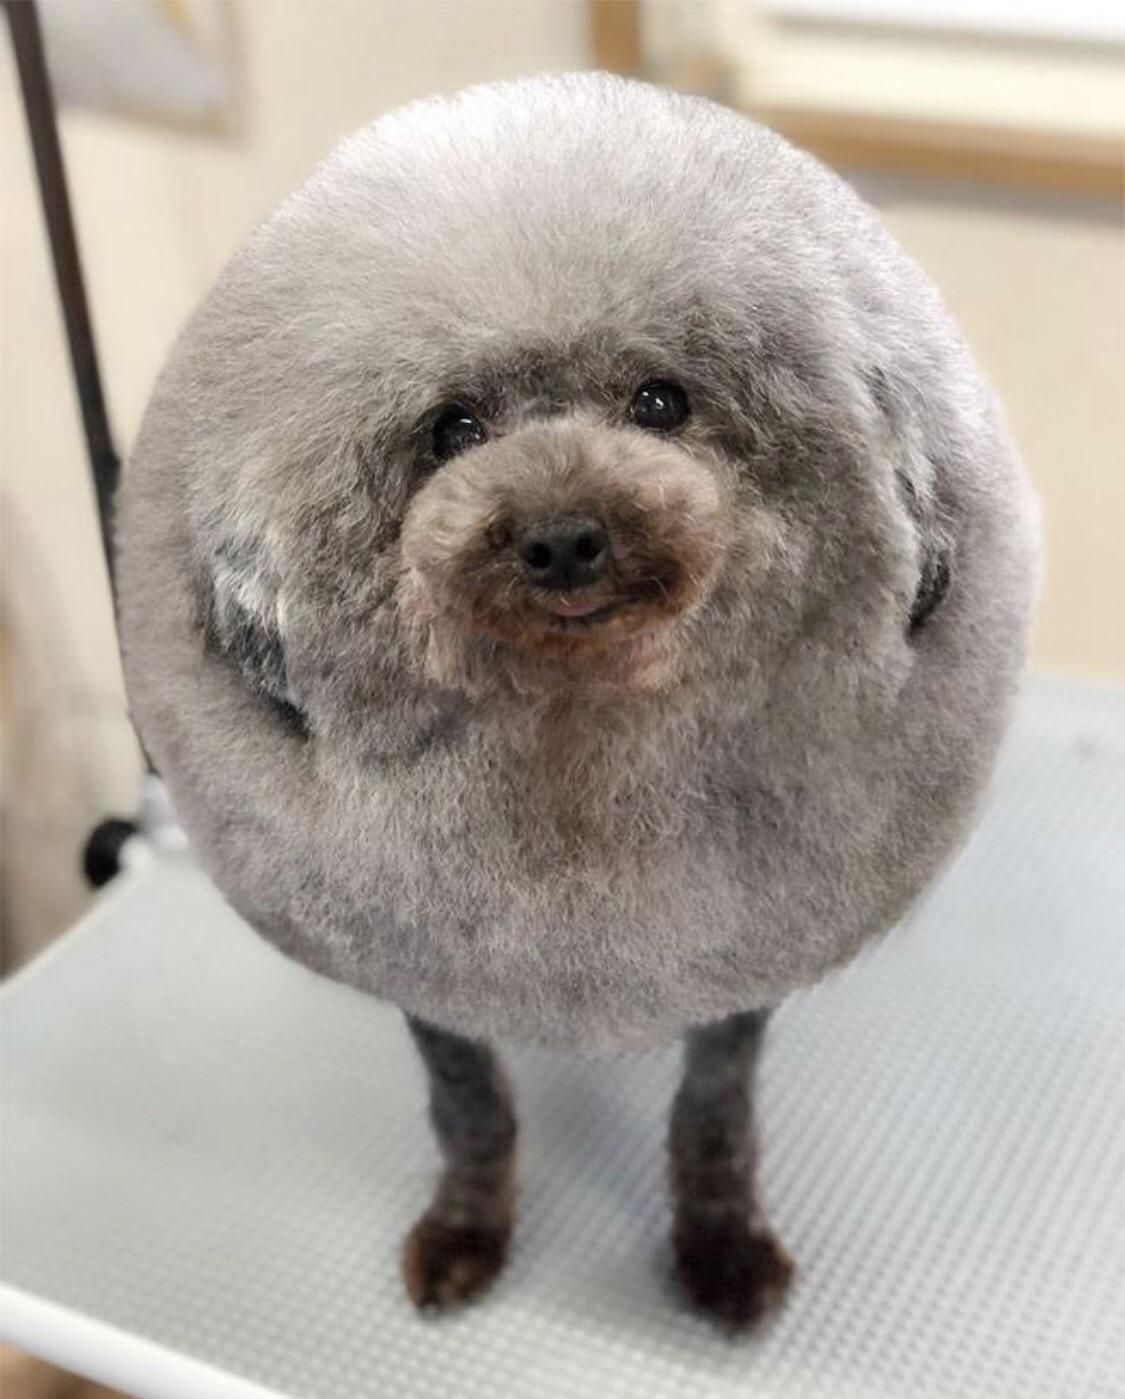 Best haircut a dog could ever want!